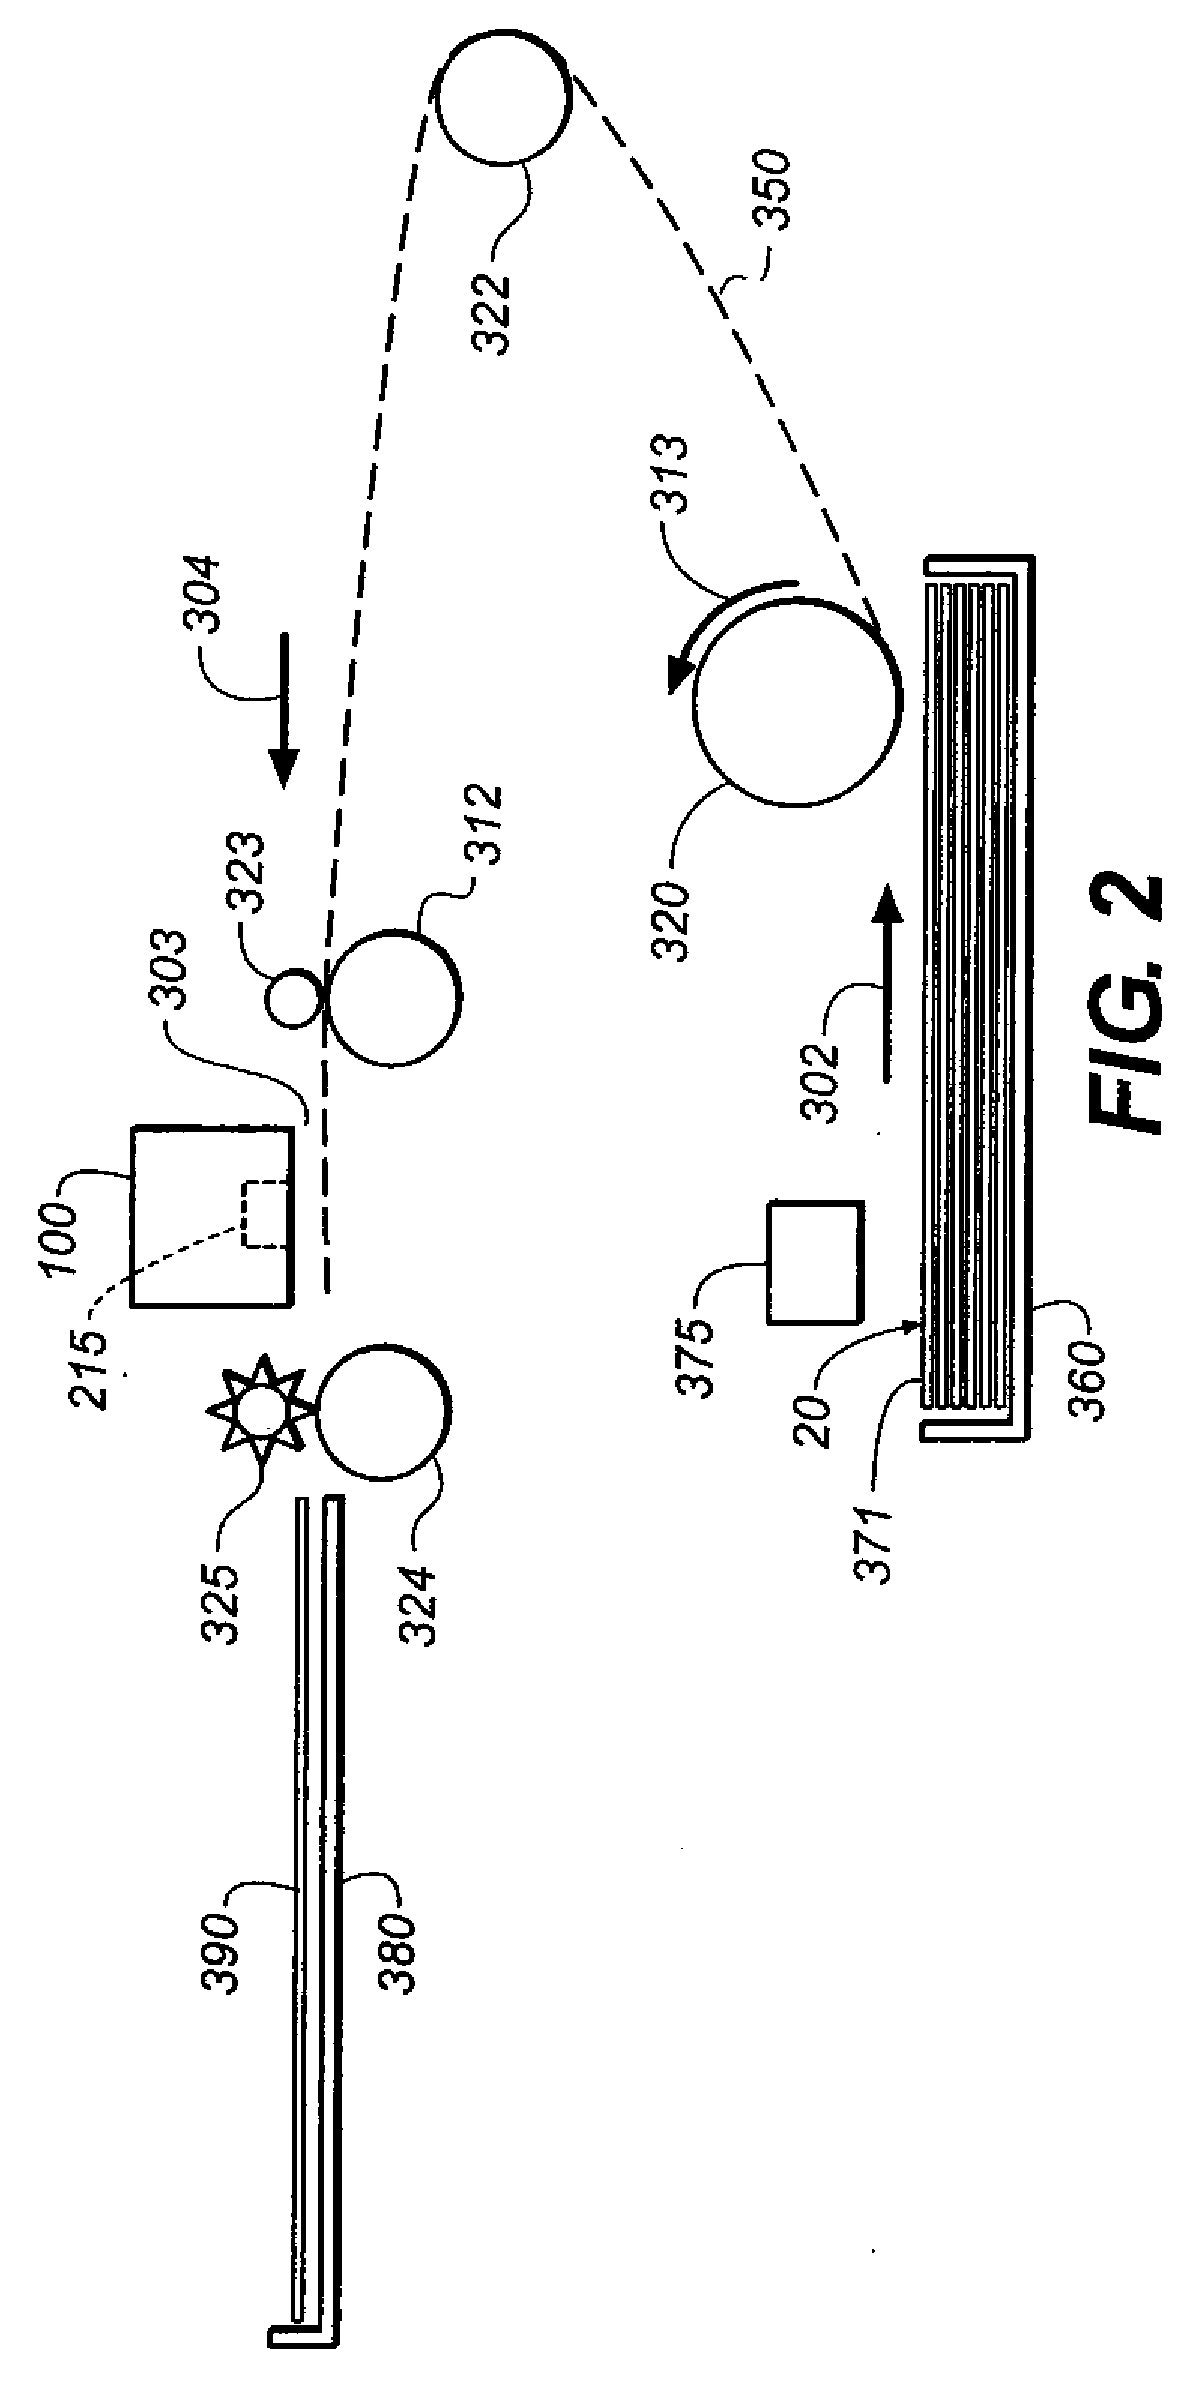 Inkjet media system with improved image quality